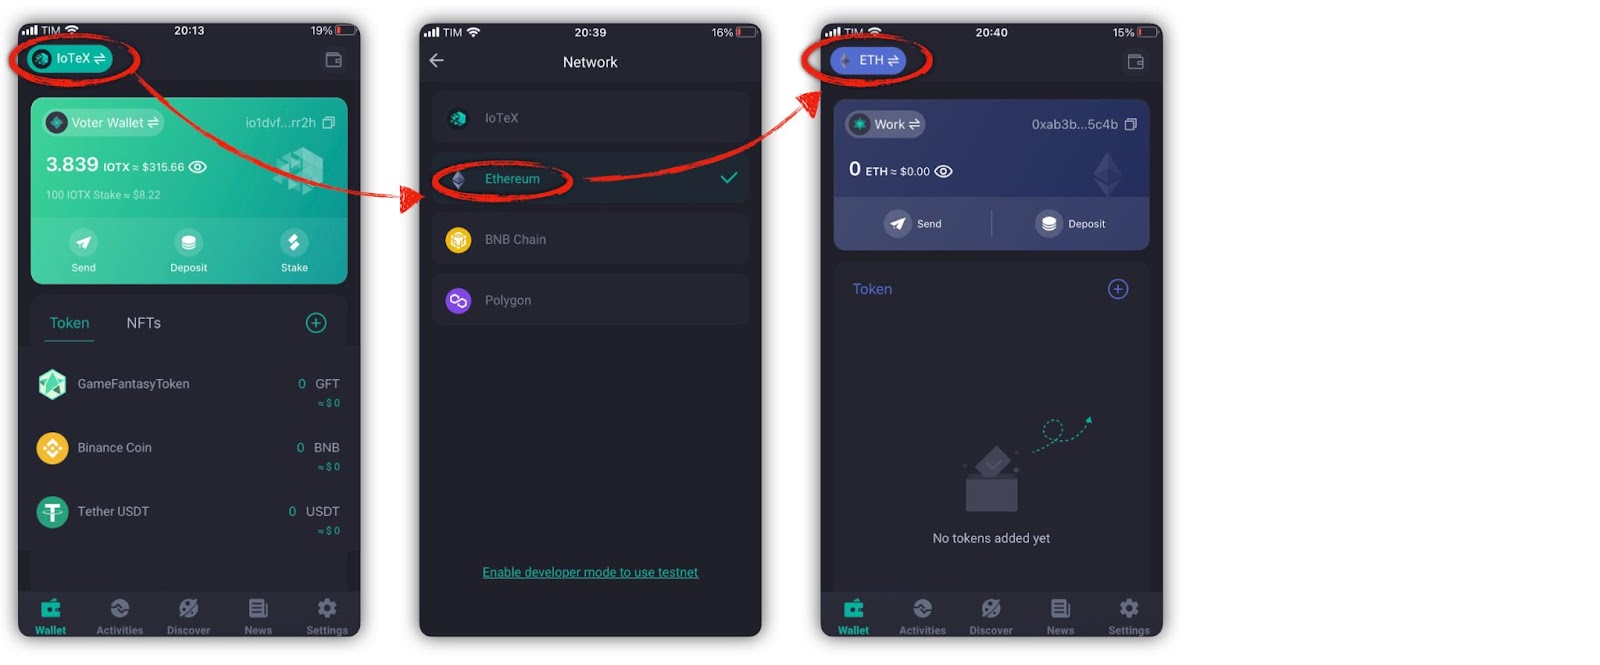 Screenshot of steps to switch networks in ioPay app